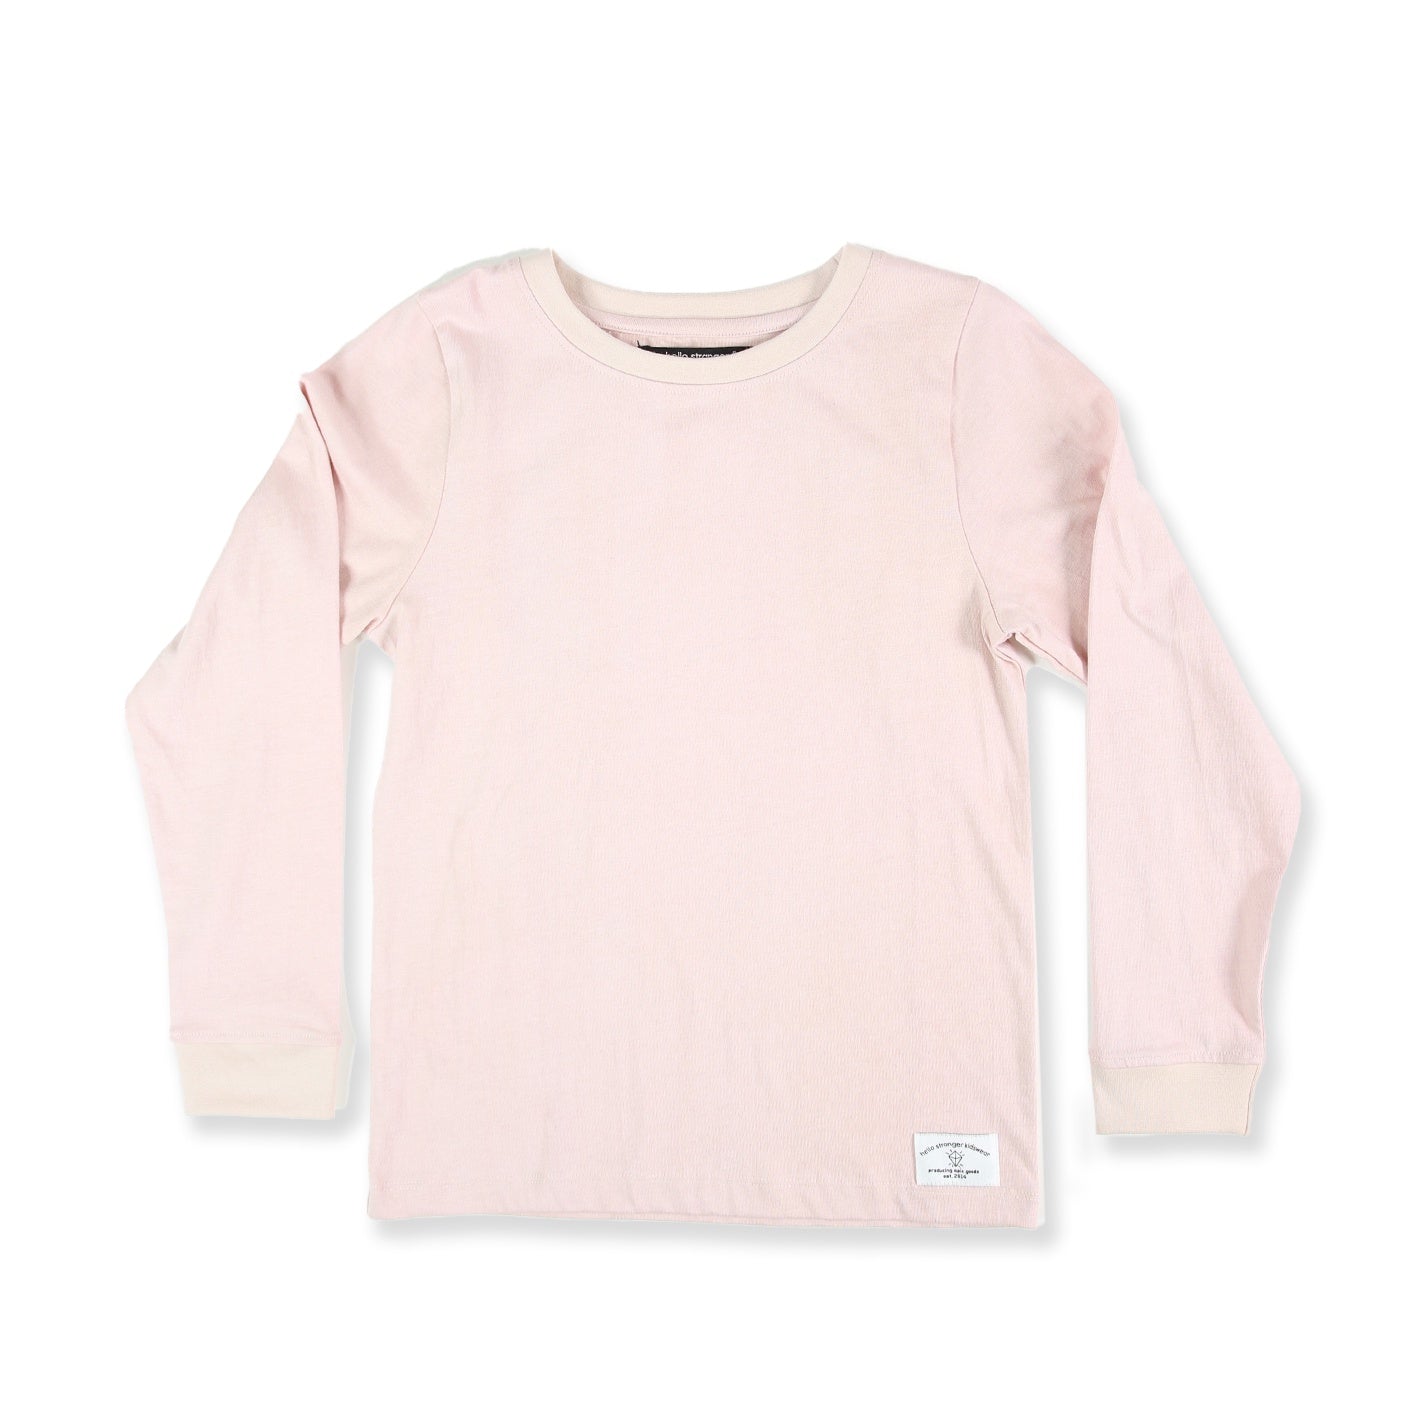 Classic Performance Top - Dusty Rose